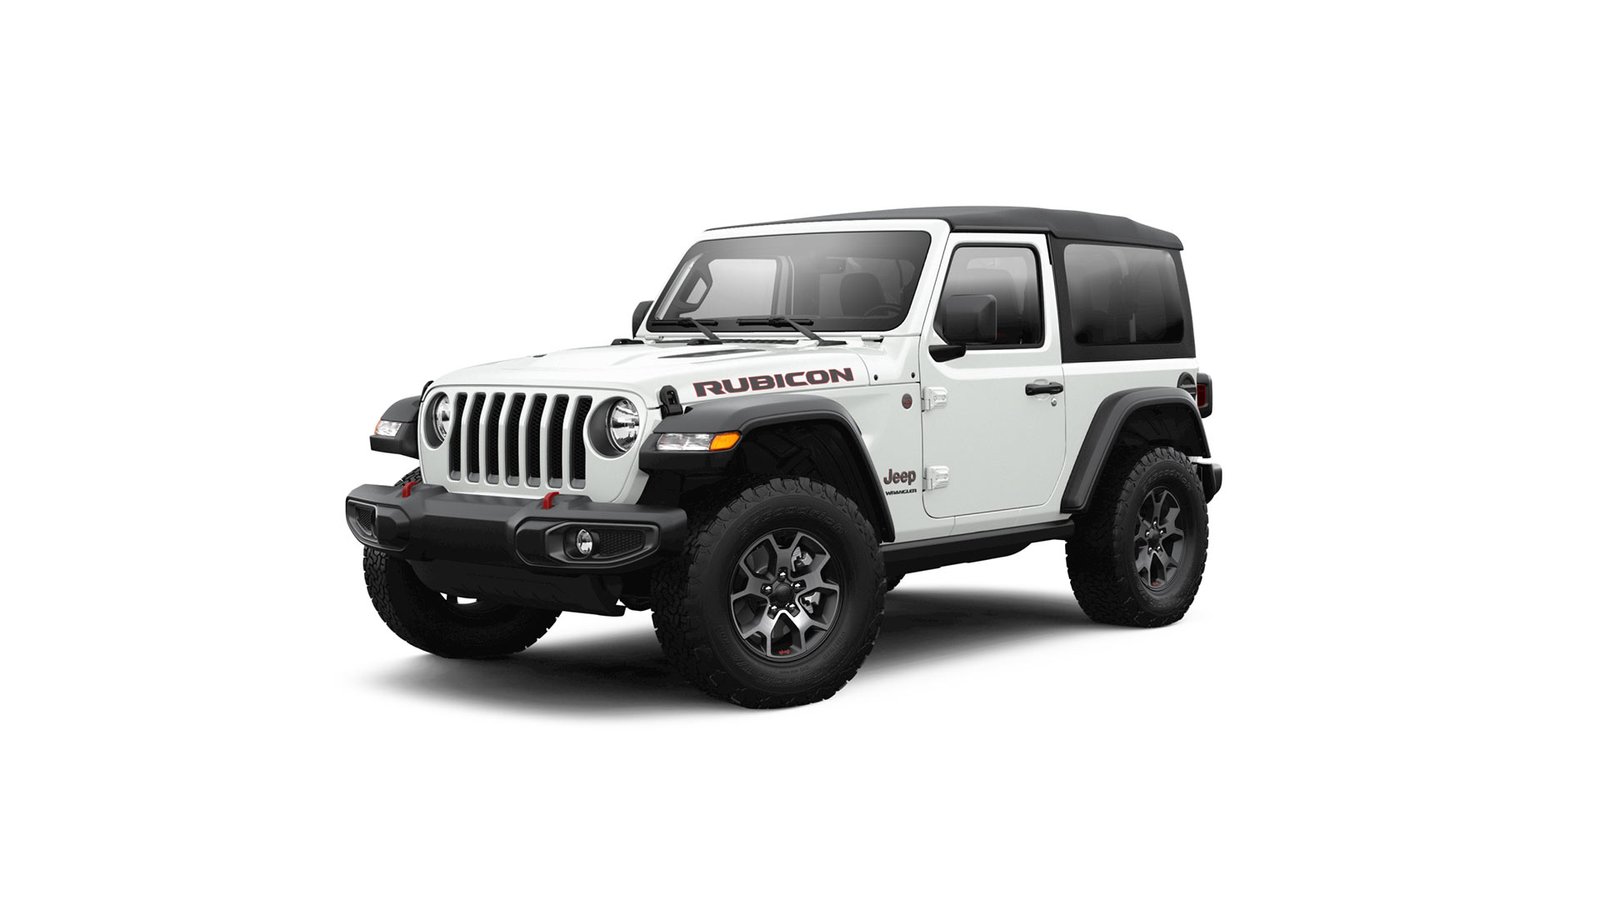 2022 Jeep Wrangler Rubicon 4X4 - All Color Options - Images - AUTOBICS